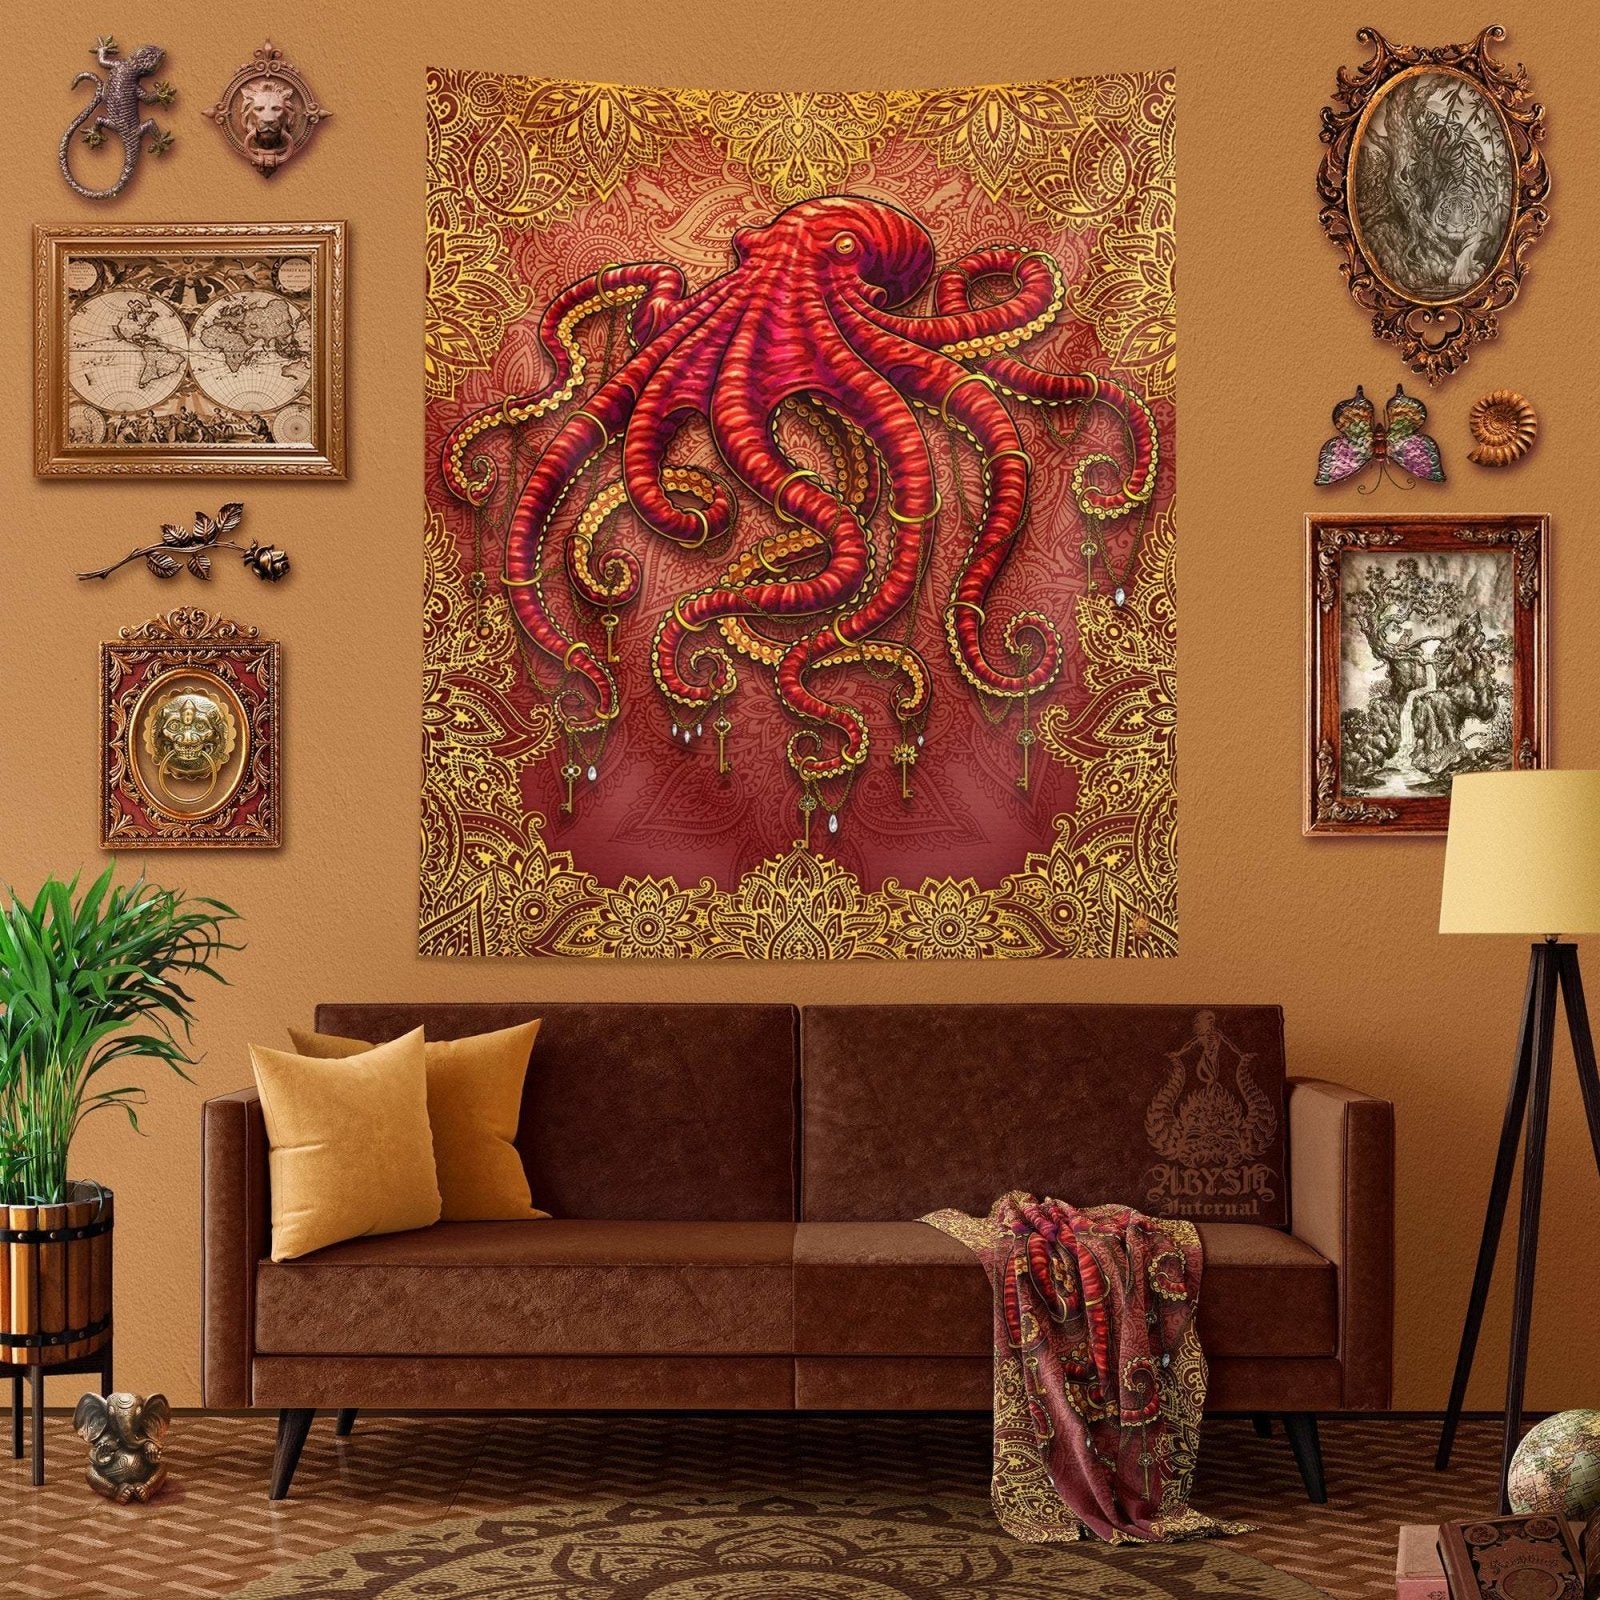 Boho Tapestry, Indie Wall Hanging, Hippie Home Decor, Art Print, Eclectic and Funky - Octopus, Mandalas - Abysm Internal